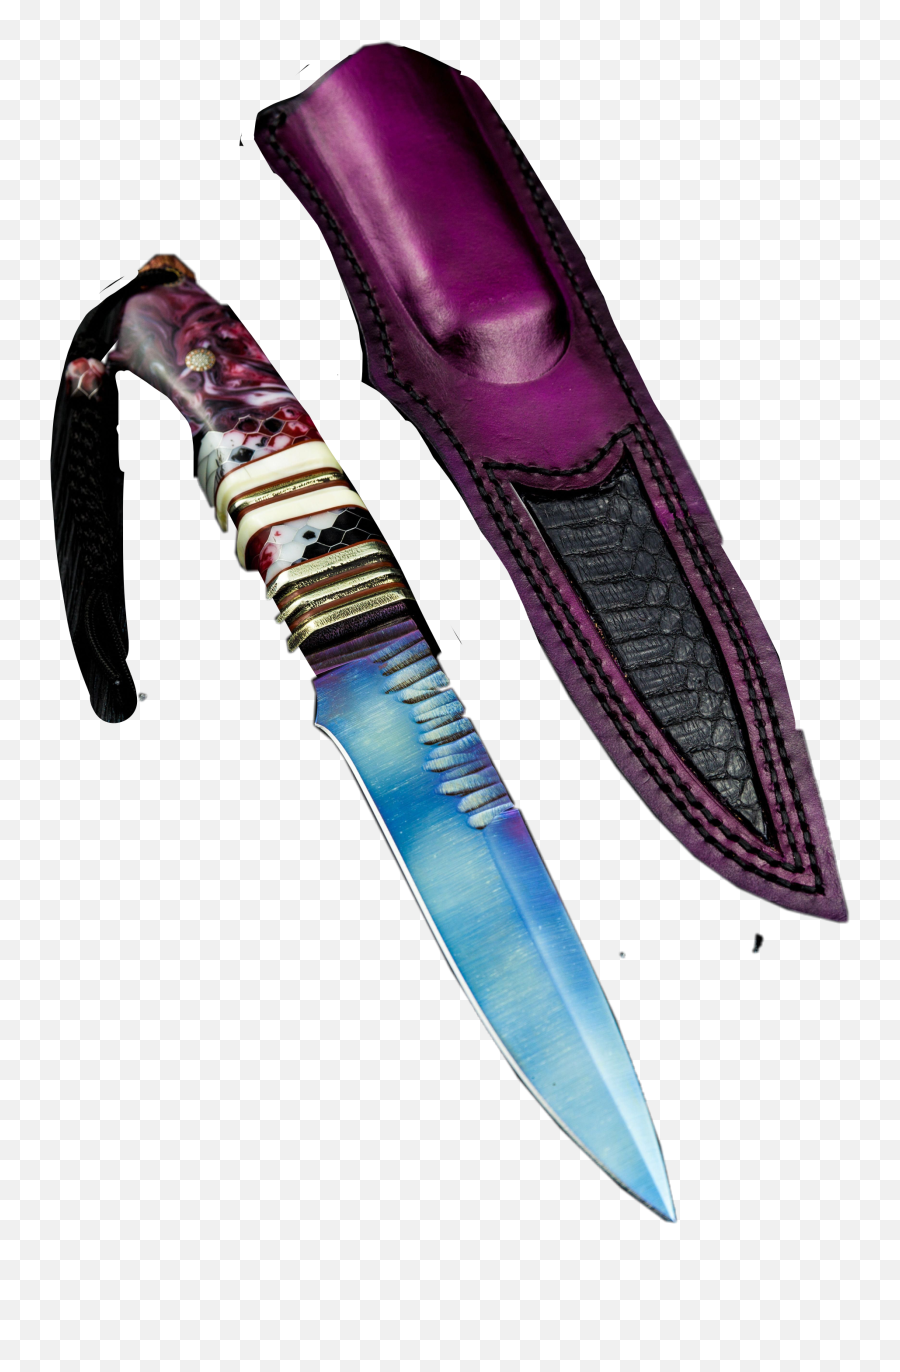 Discover Trending - Collectible Knife Emoji,Killing People Emoticon Knife